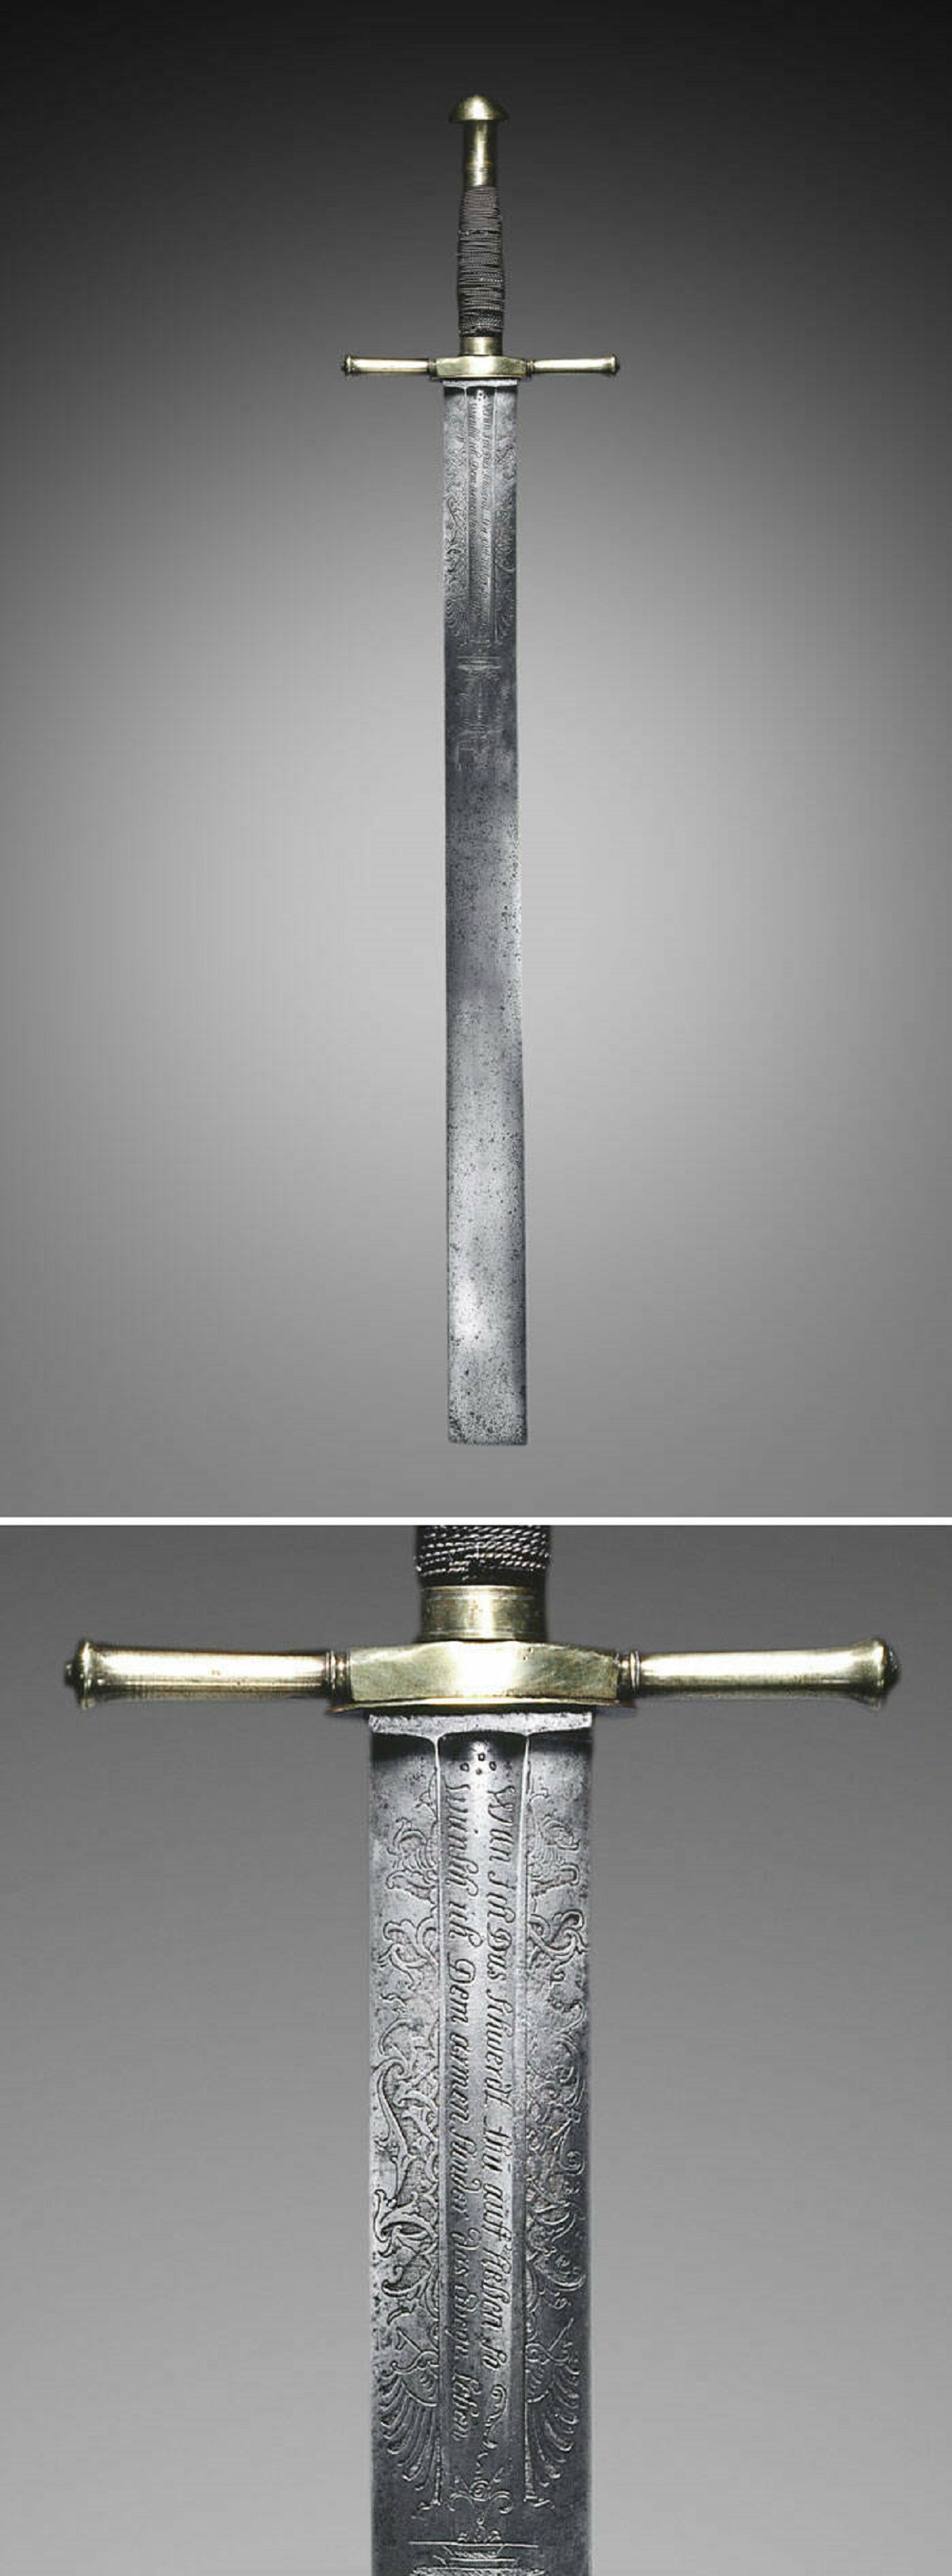 "Executioner's Sword With An Inscription That Reads "When I Raise This Sword, So I Wish That This Poor Sinner Will Receive Eternal Life". Germany, Late 17th Century"